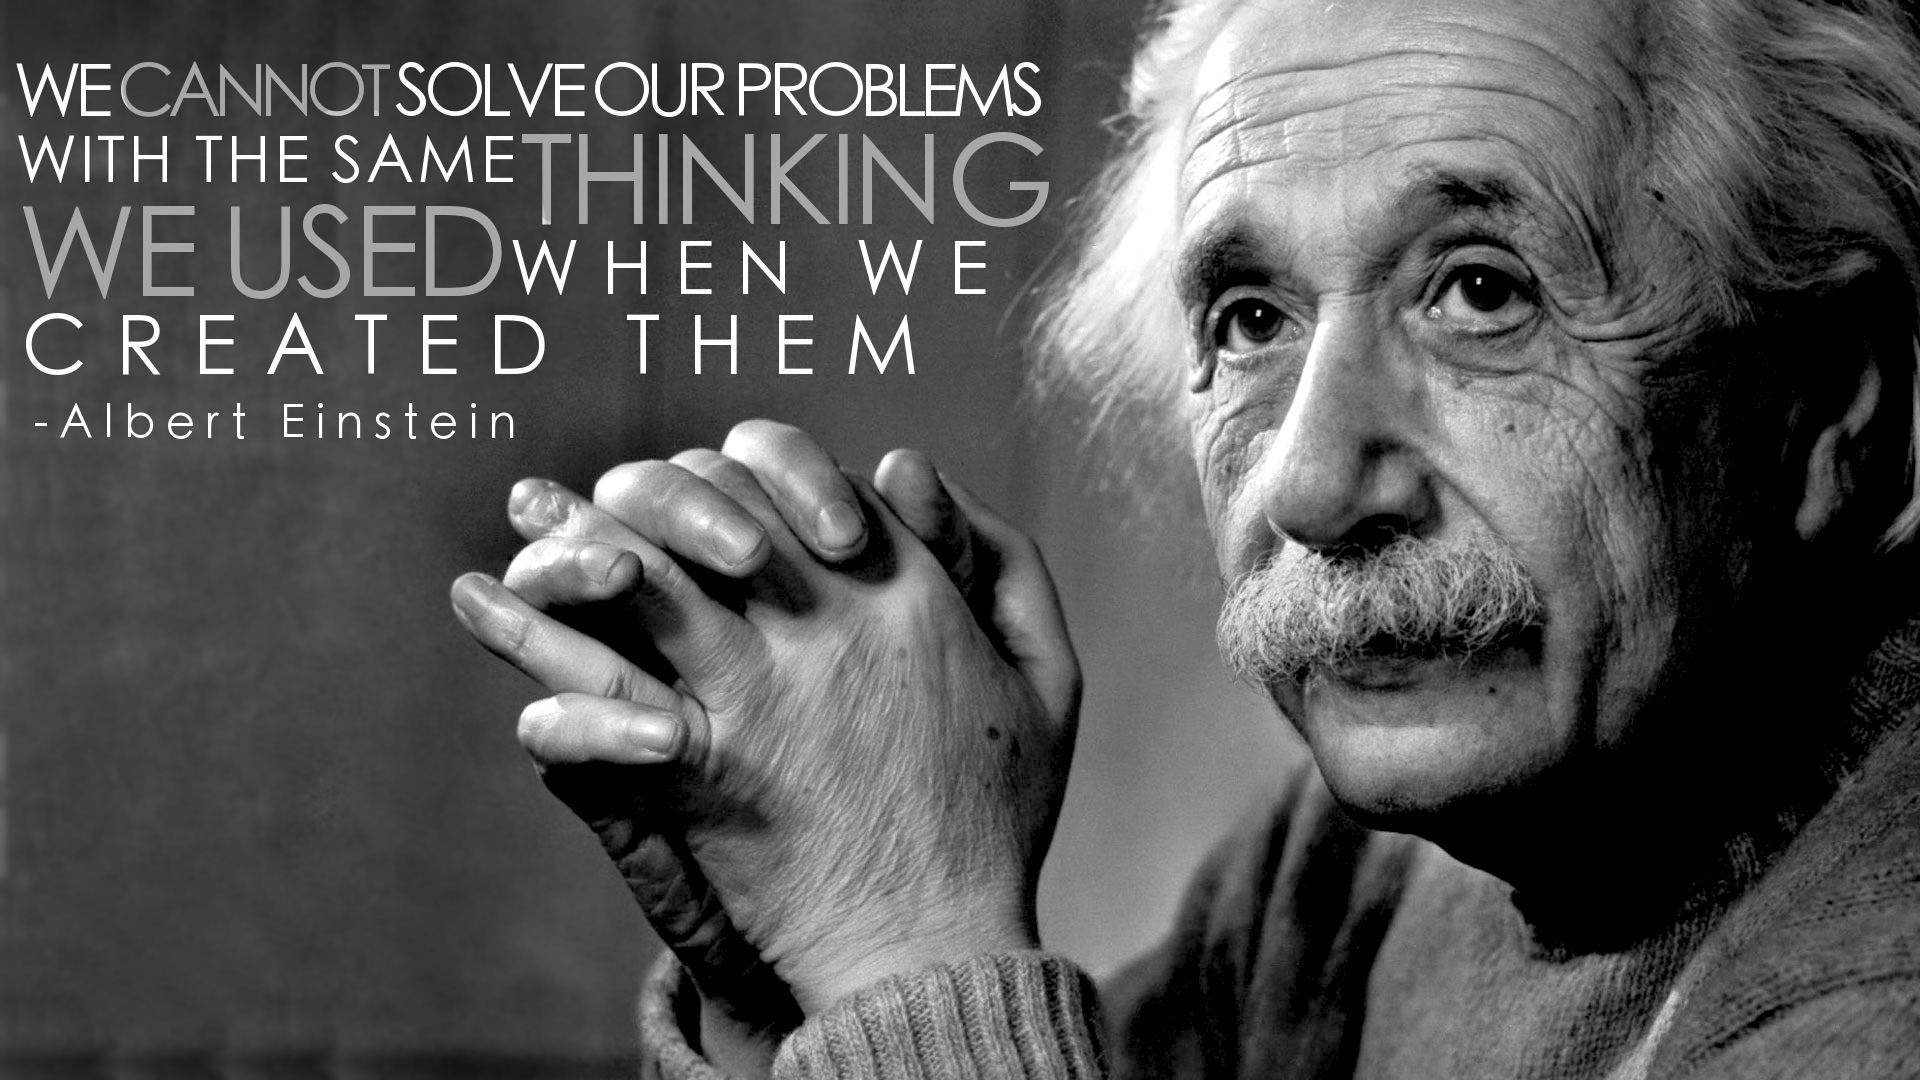 We Cannot Solve Our Problems With The Same Thinking We Used When We Created Them